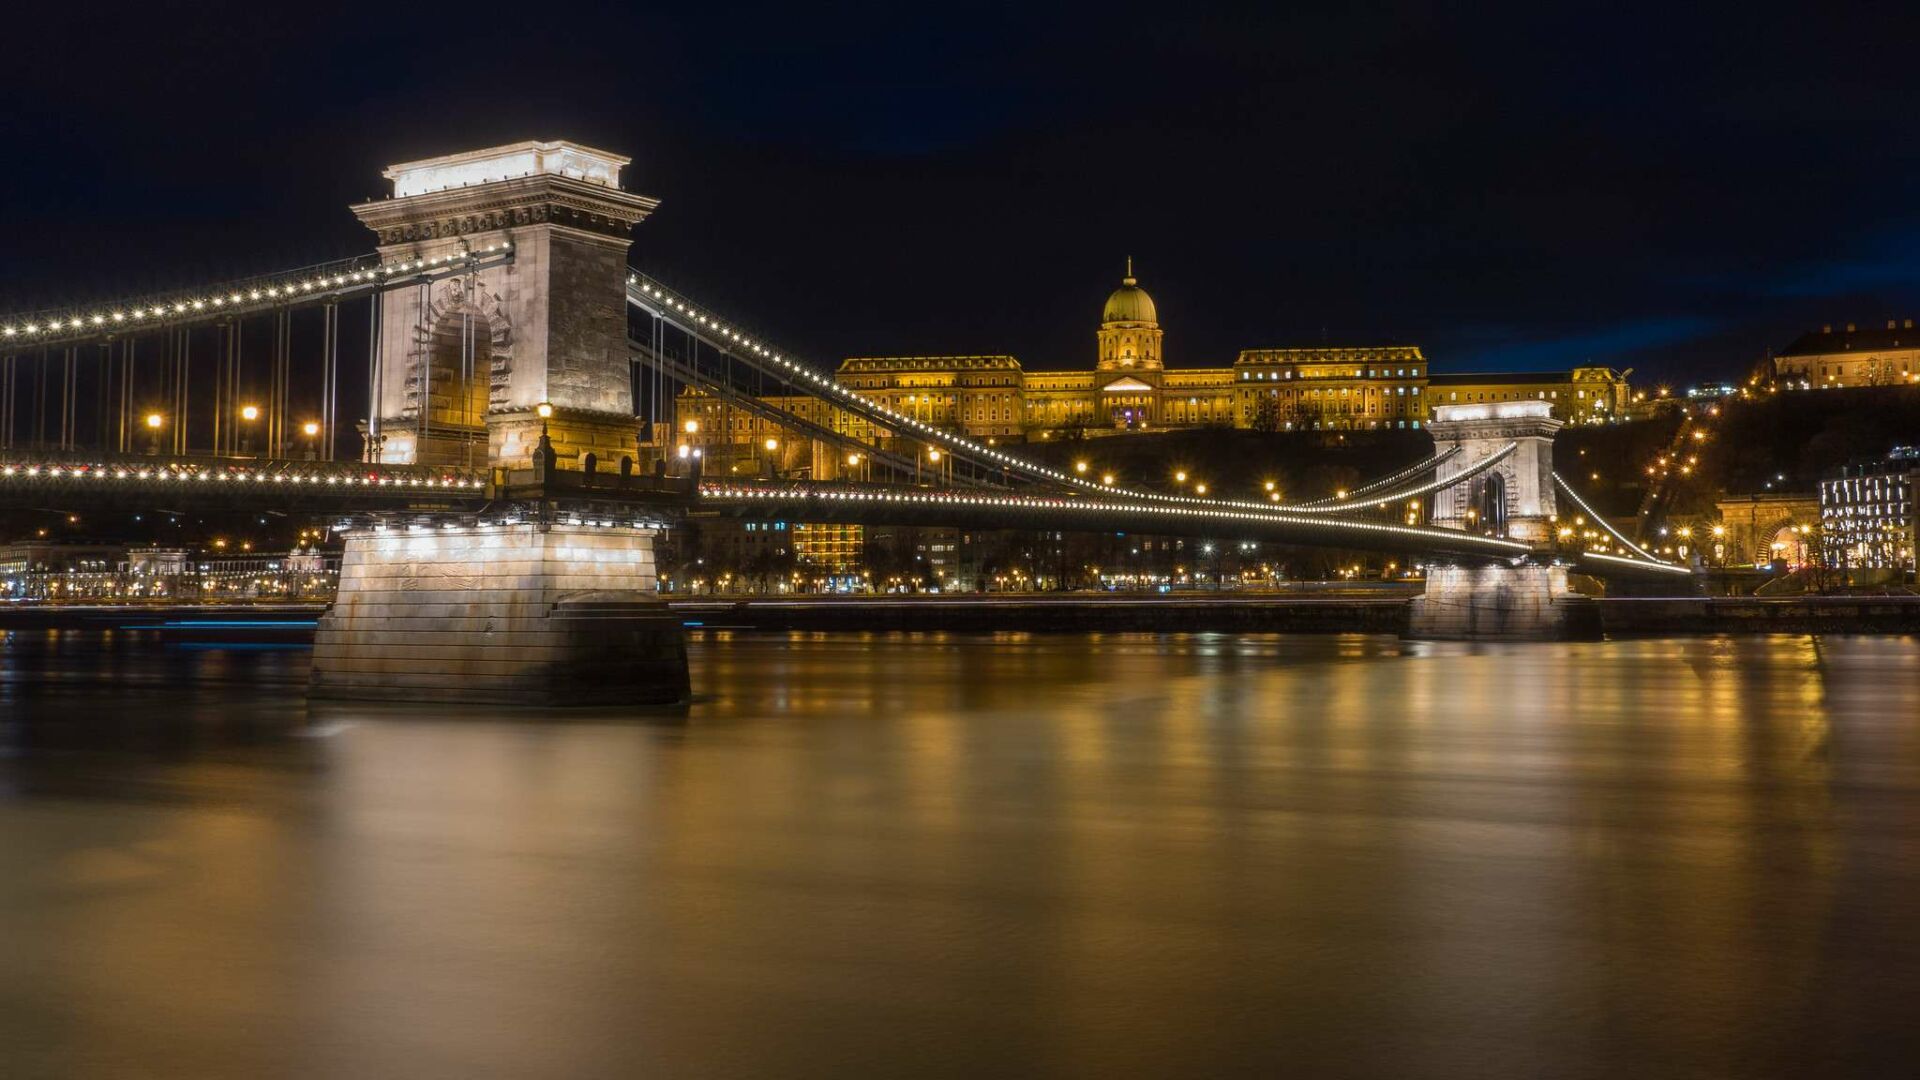  View of Budapest from beneath the Chain Bridge